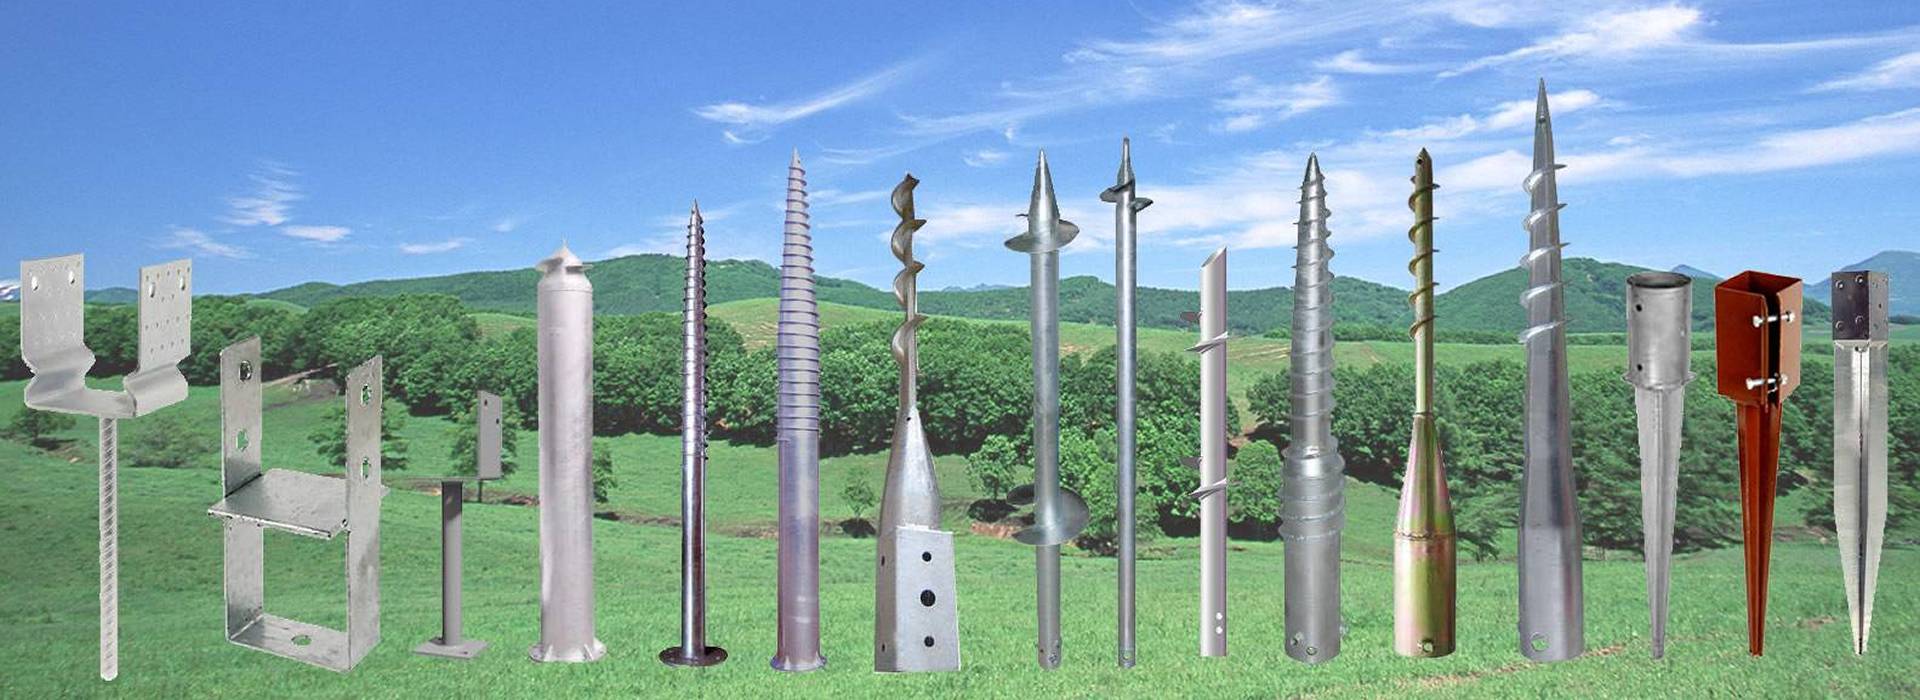 sixteen post anchors including three post spikes, ten ground screws and three post supports.